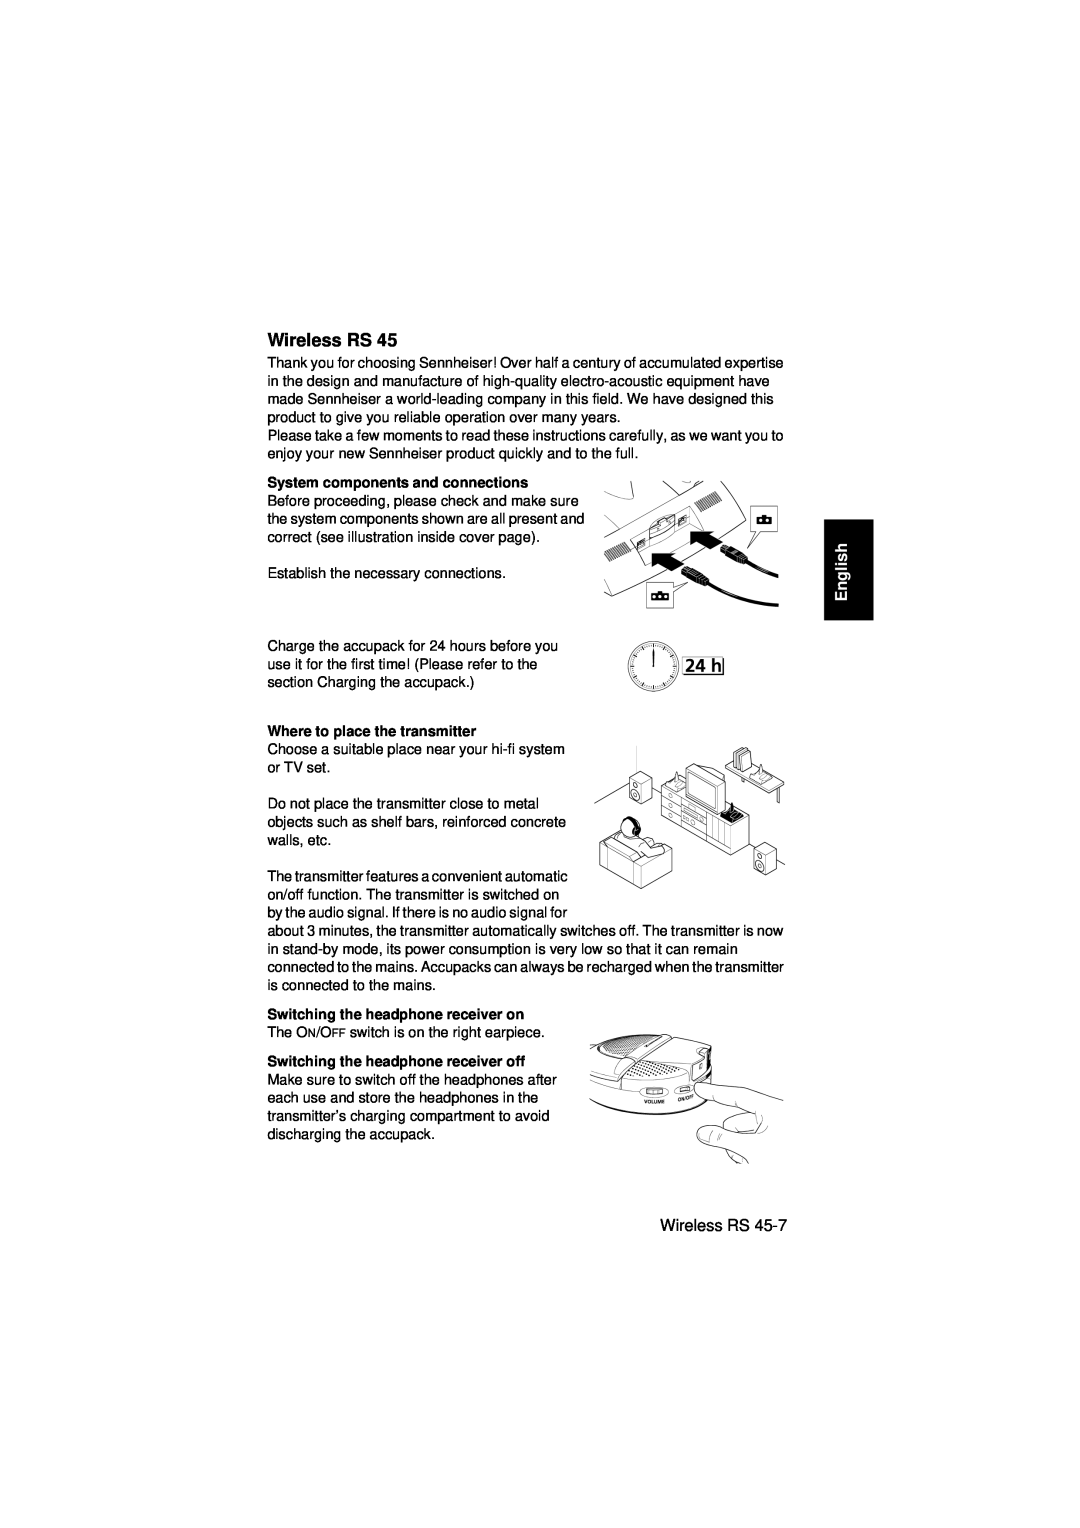 Sennheiser RS 45 instruction manual Wireless RS, English, System components and connections, Where to place the transmitter 